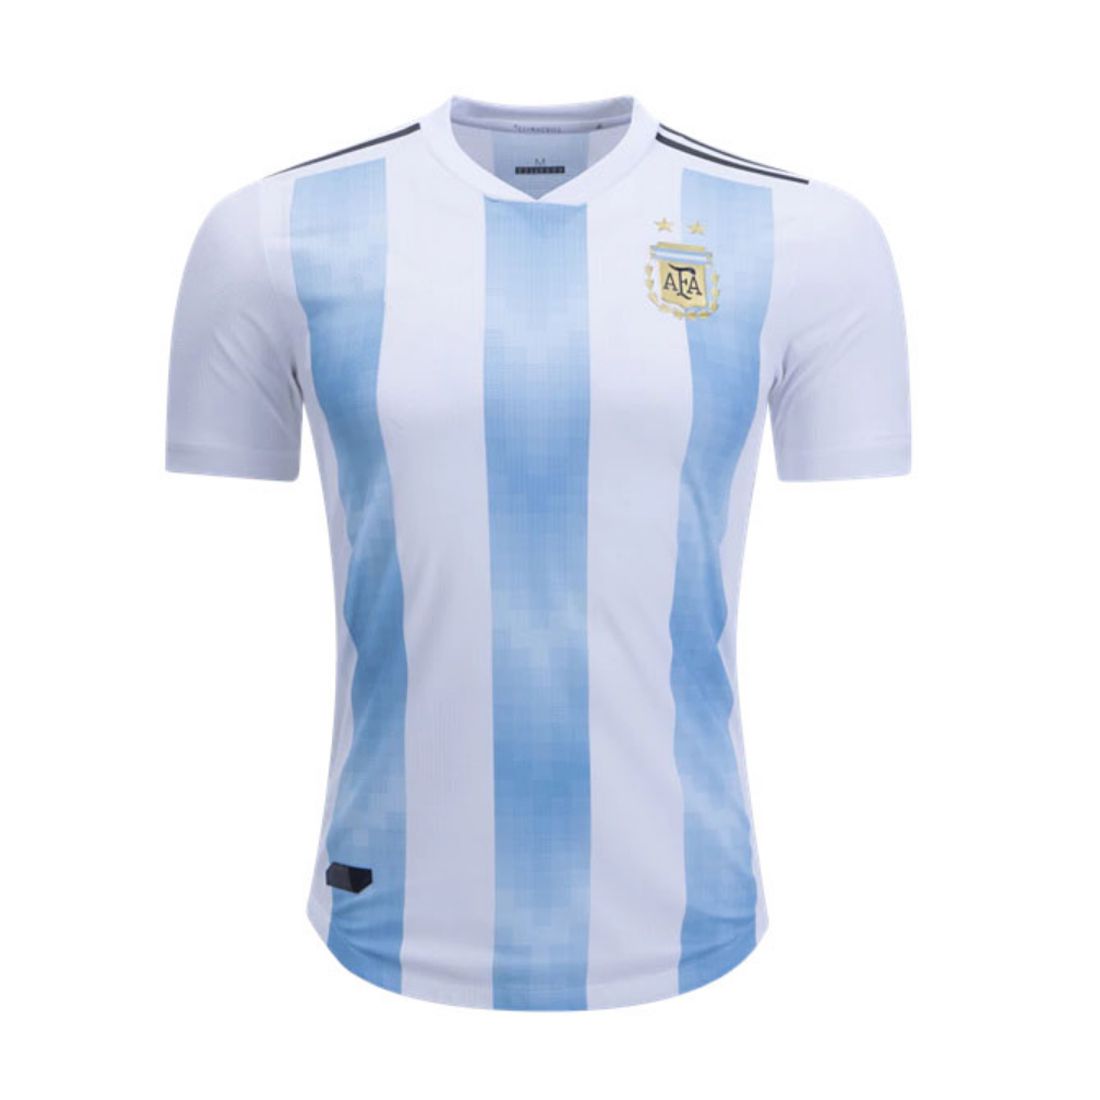 FIFA World Cup Argentina National Team Jersey Buy FIFA World Cup